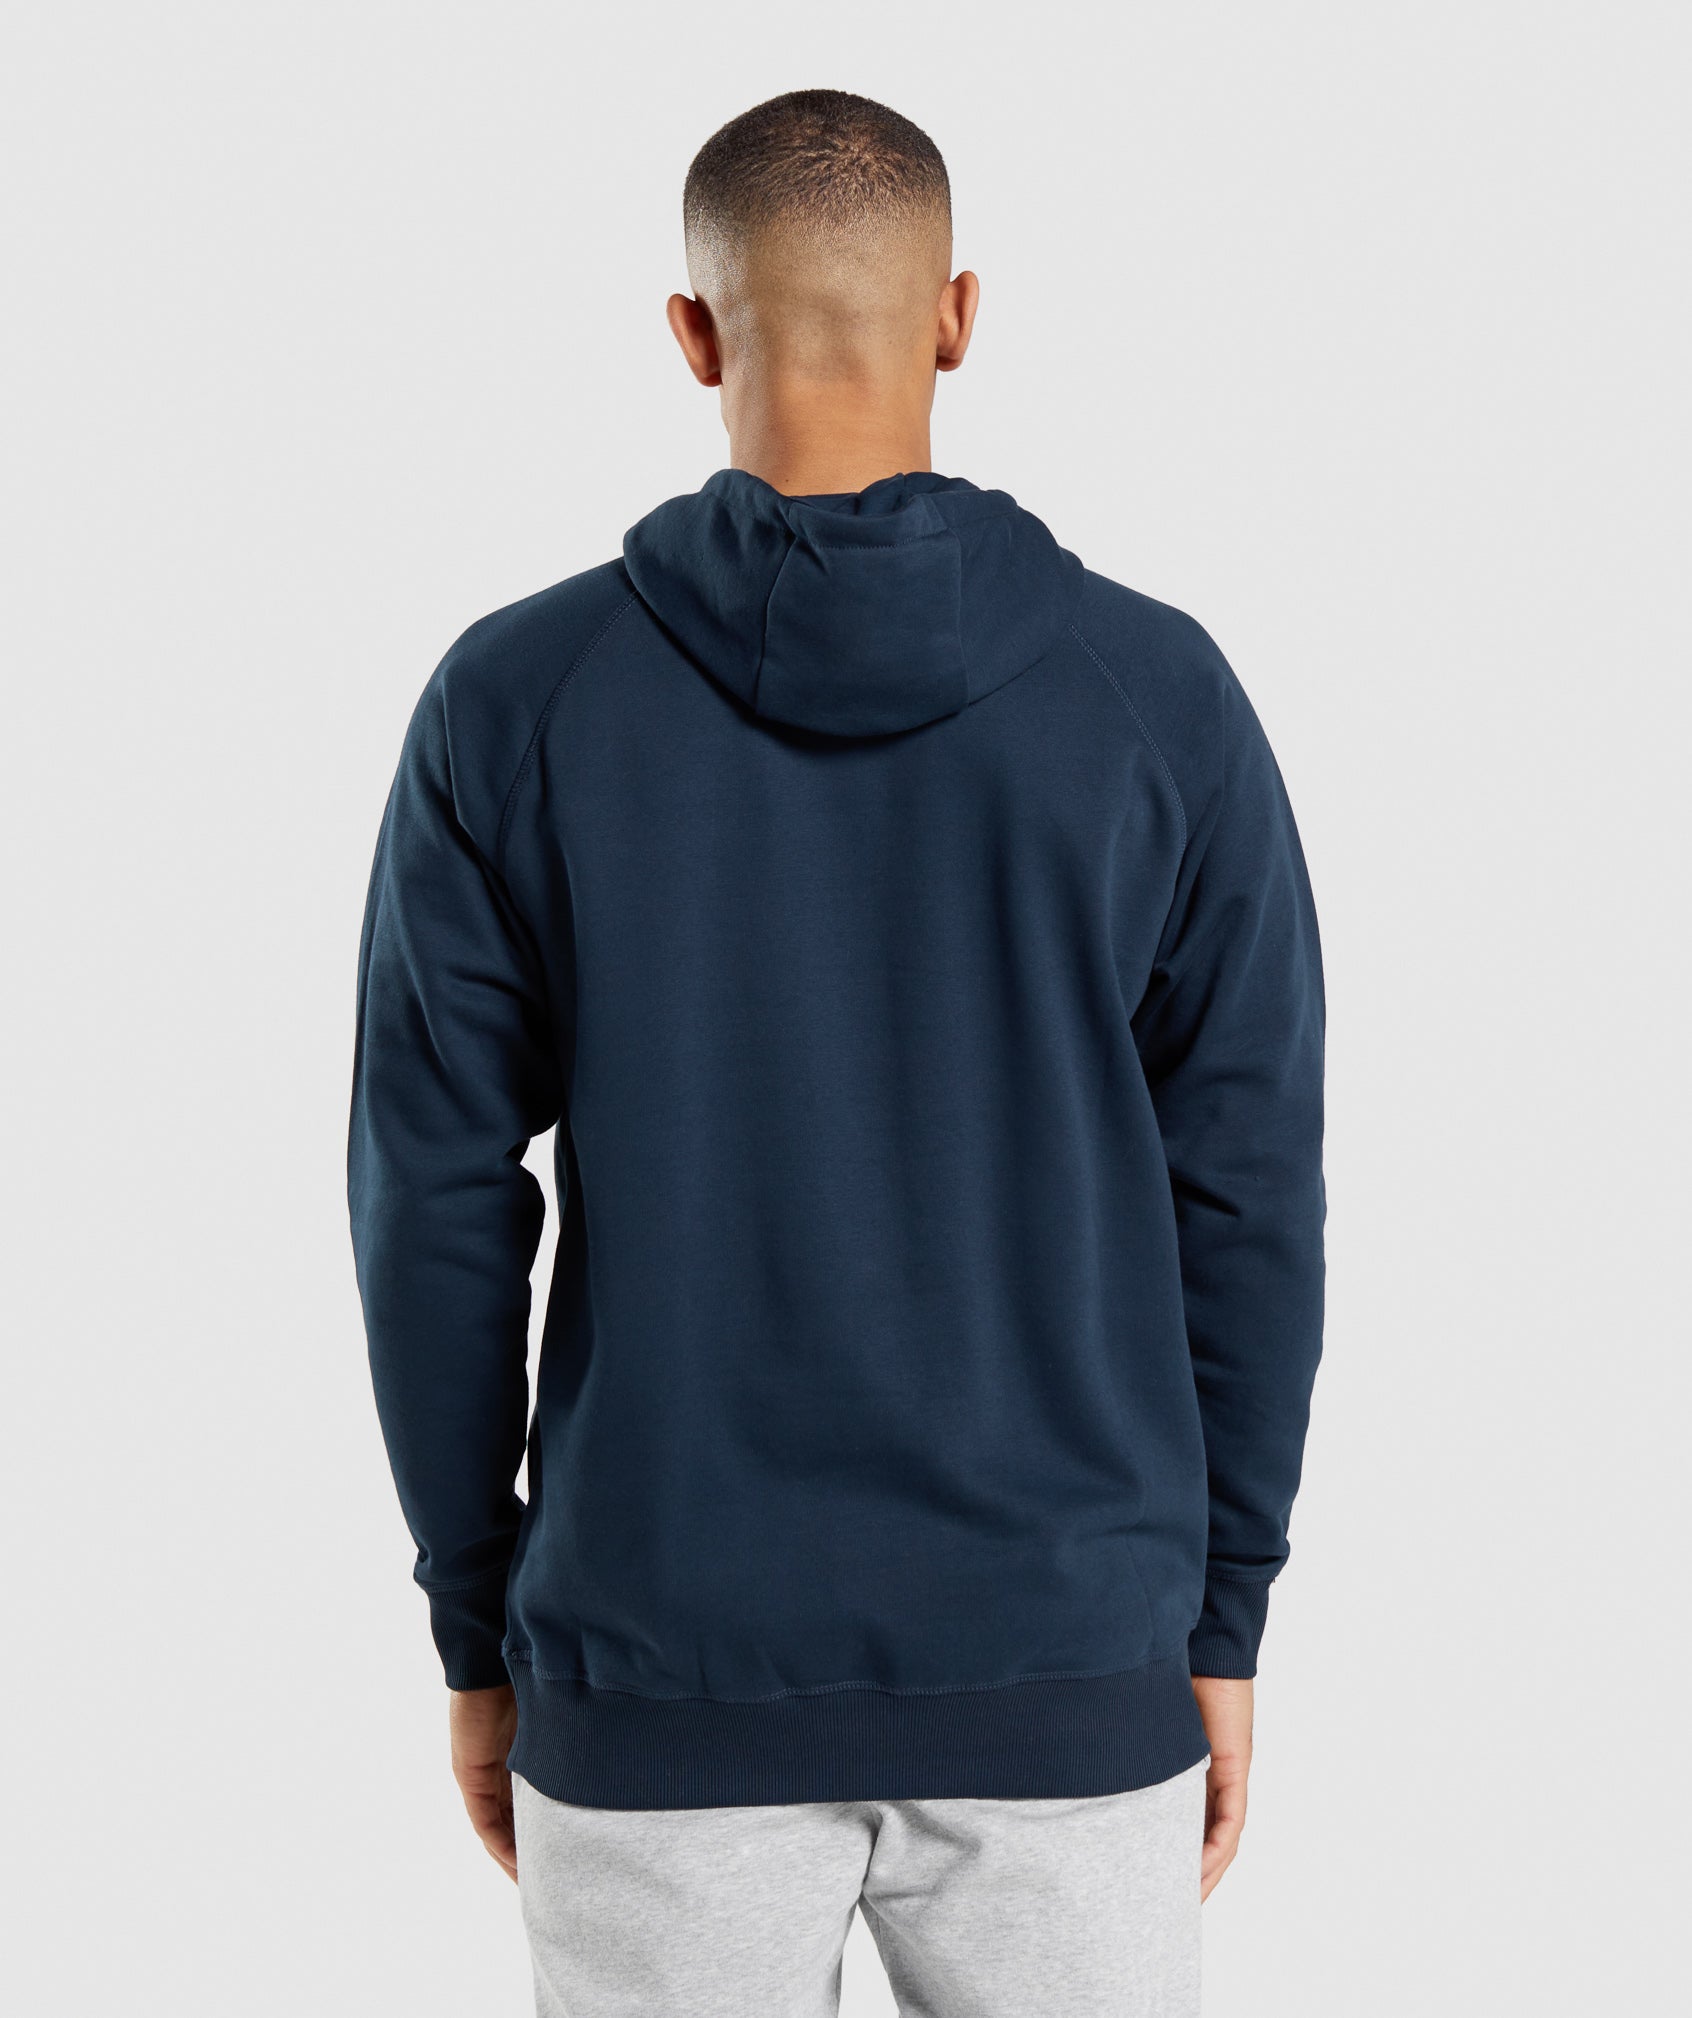 Apollo Hoodie in Navy